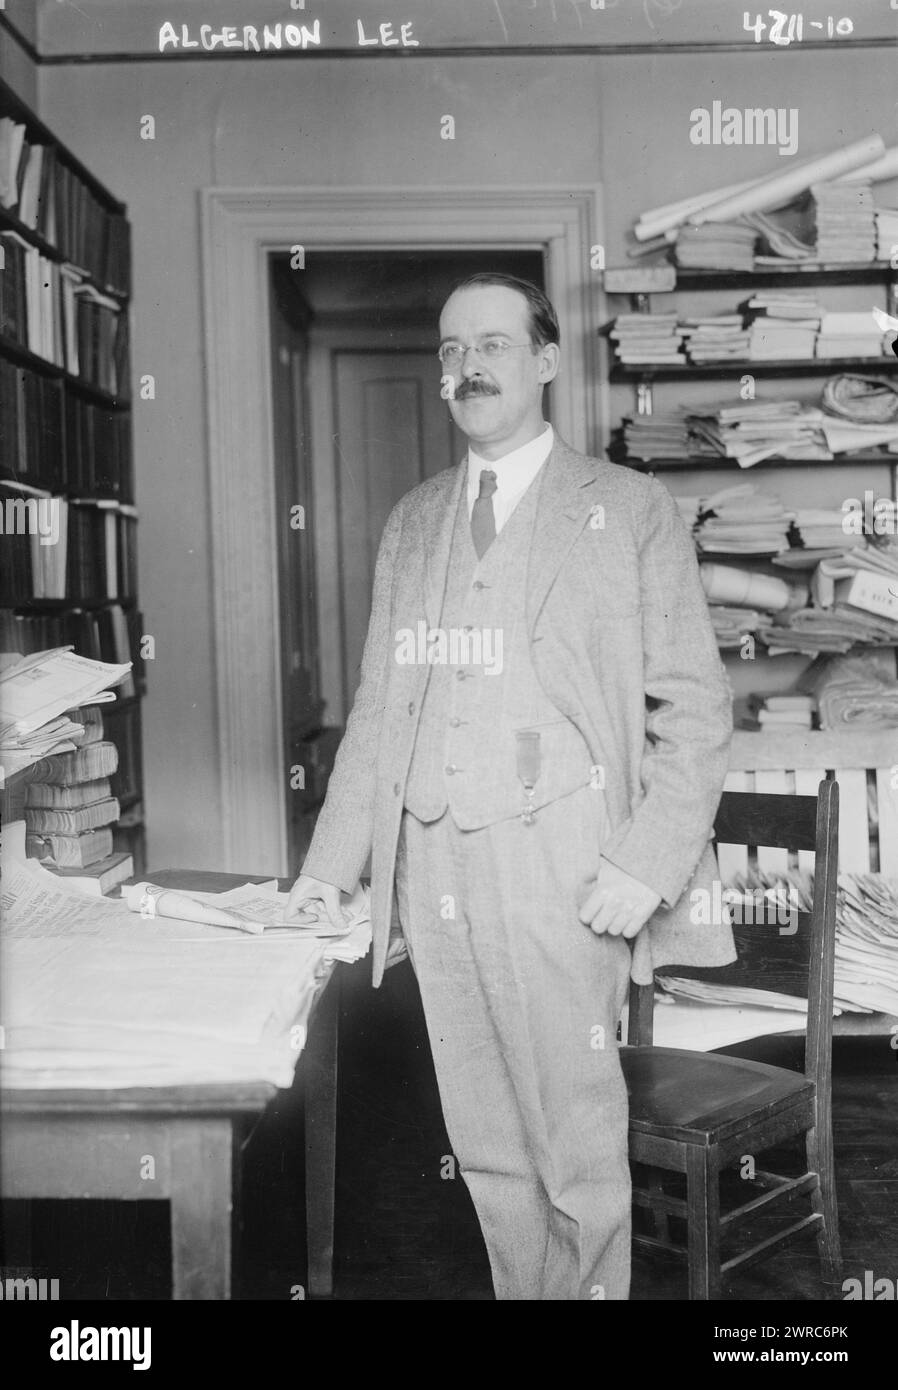 Algernon Lee, Photograph shows Algernon Lee (1873-1954), an American socialist politician and educator. In 1917, he was refused a passport to attend an international conference of socialists due to the Logan Law of 1799 which forbids individuals from engaging in international affairs without governmental authority., between ca. 1915 and ca. 1920, Glass negatives, 1 negative: glass Stock Photo